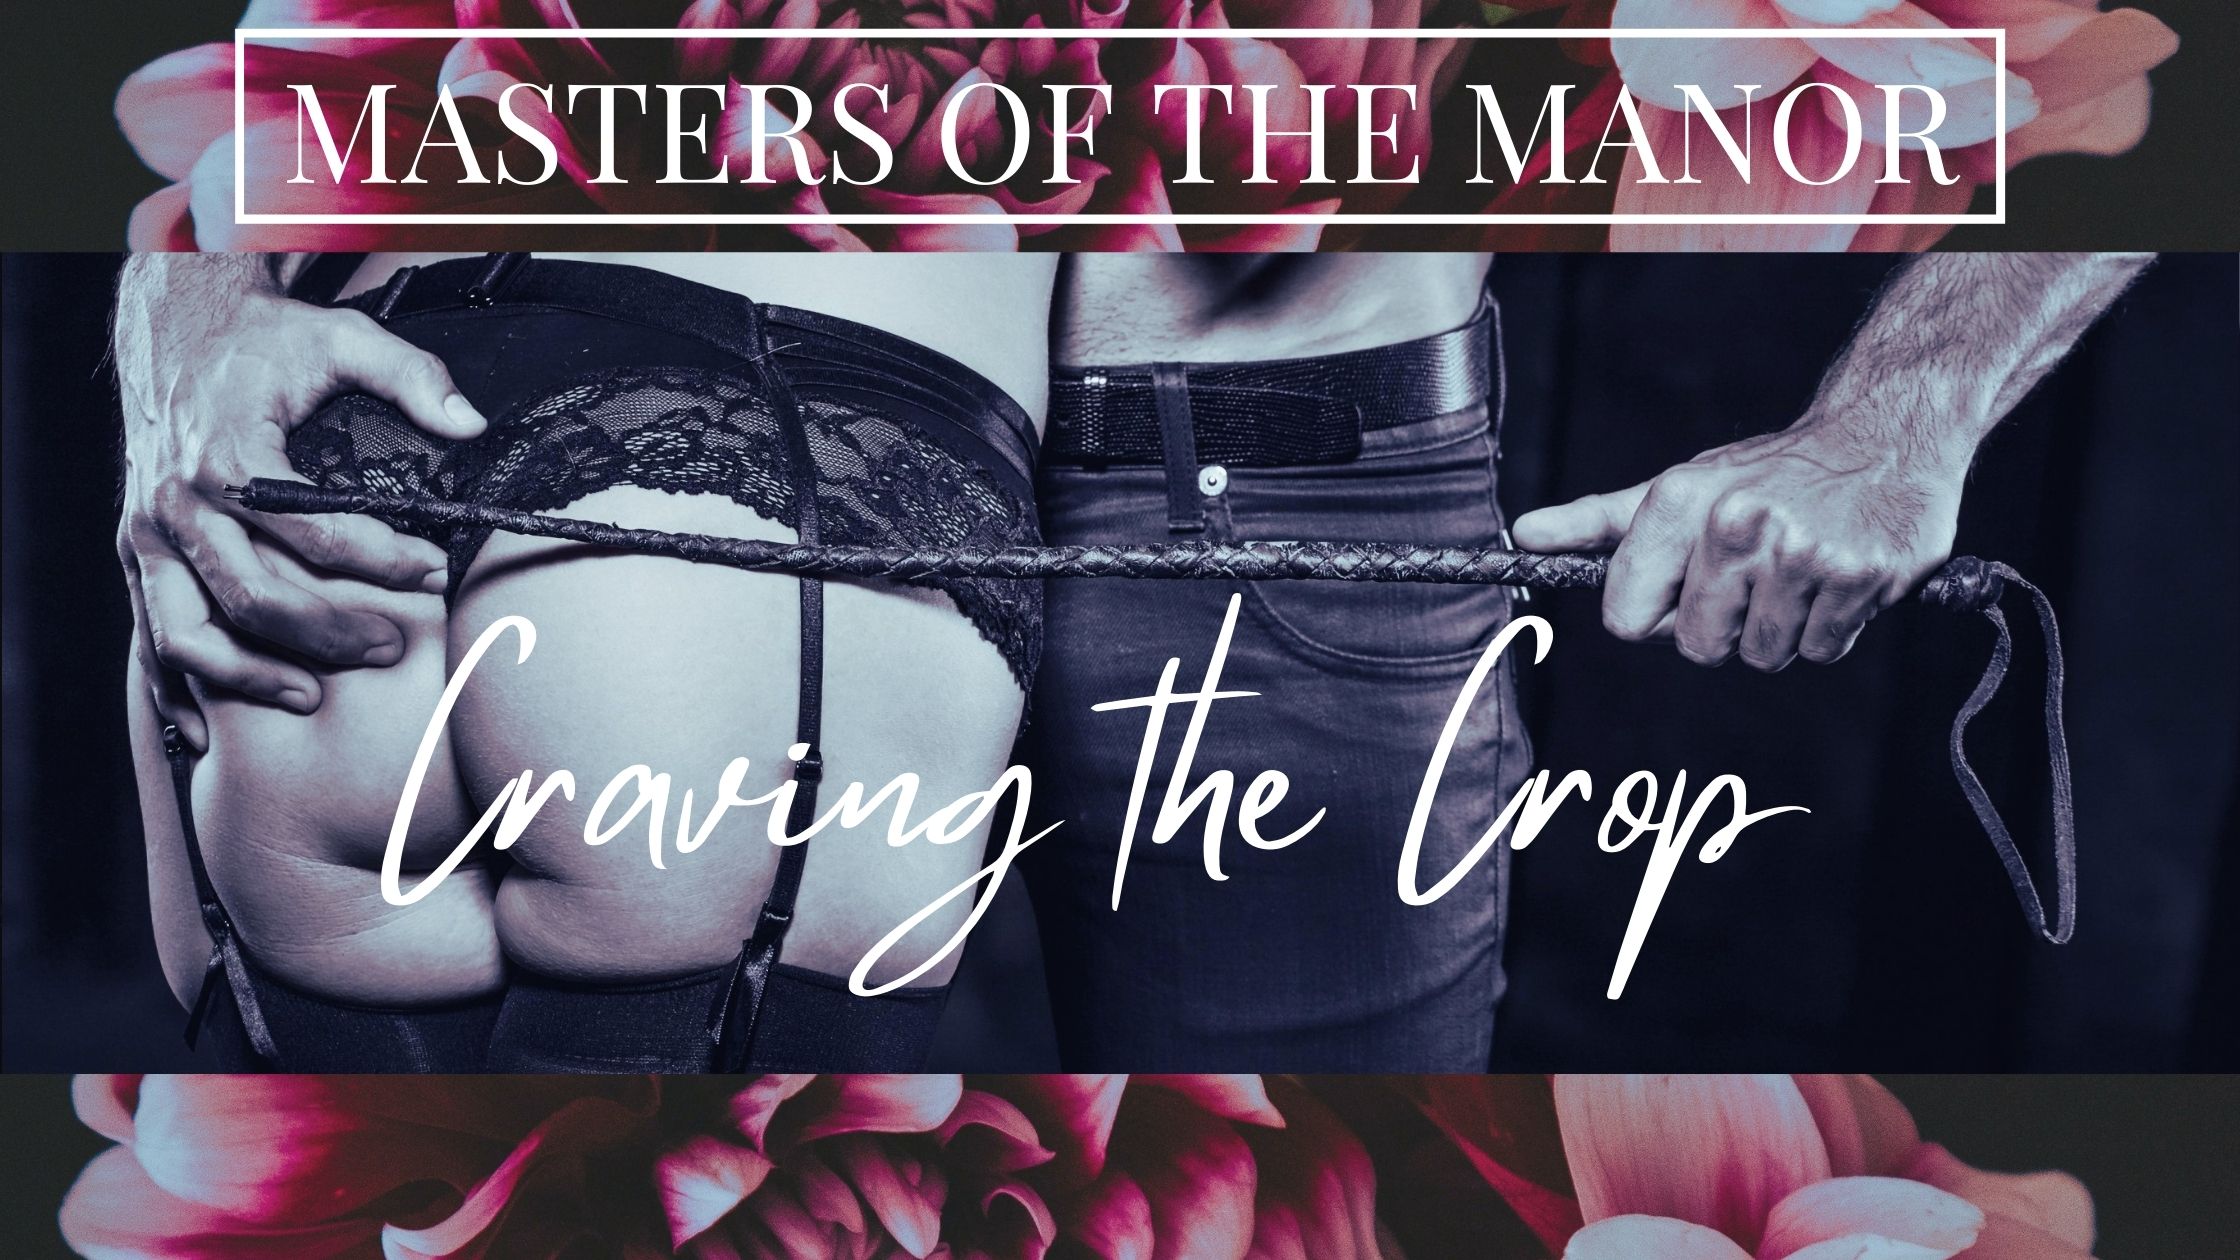 Title graphic for sexy short story "Craving the Crop", a Masters of The Manor story, showing man in jeans with a riding crop grabbing the bottom of a woman wearing lingerie and garter belt